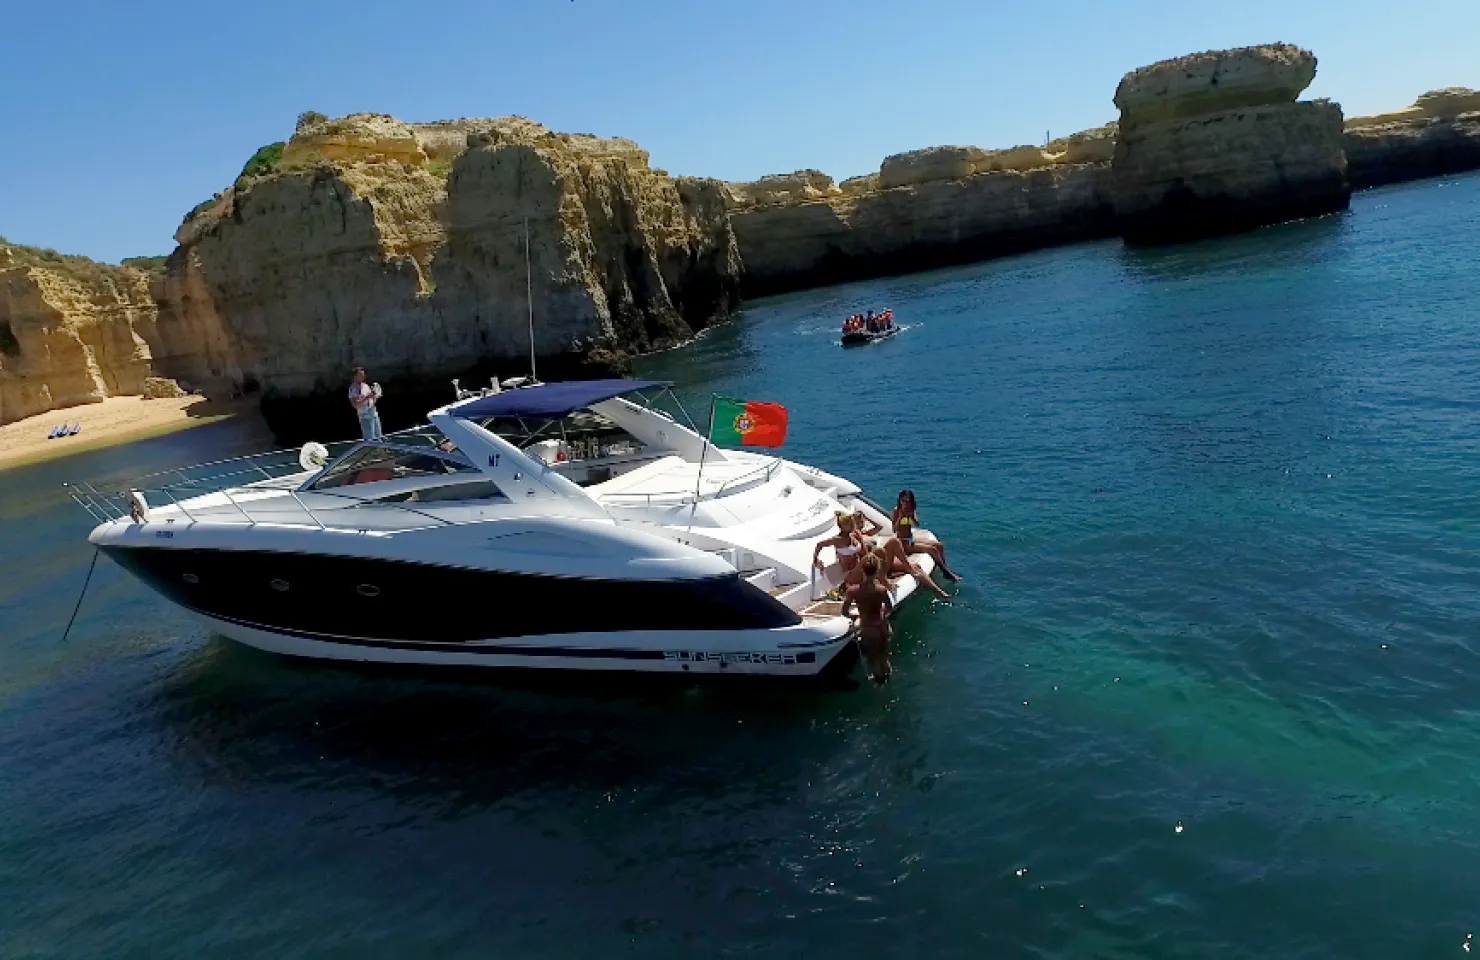 Afternoon Luxury Cruise - Vilamoura Boat Trip